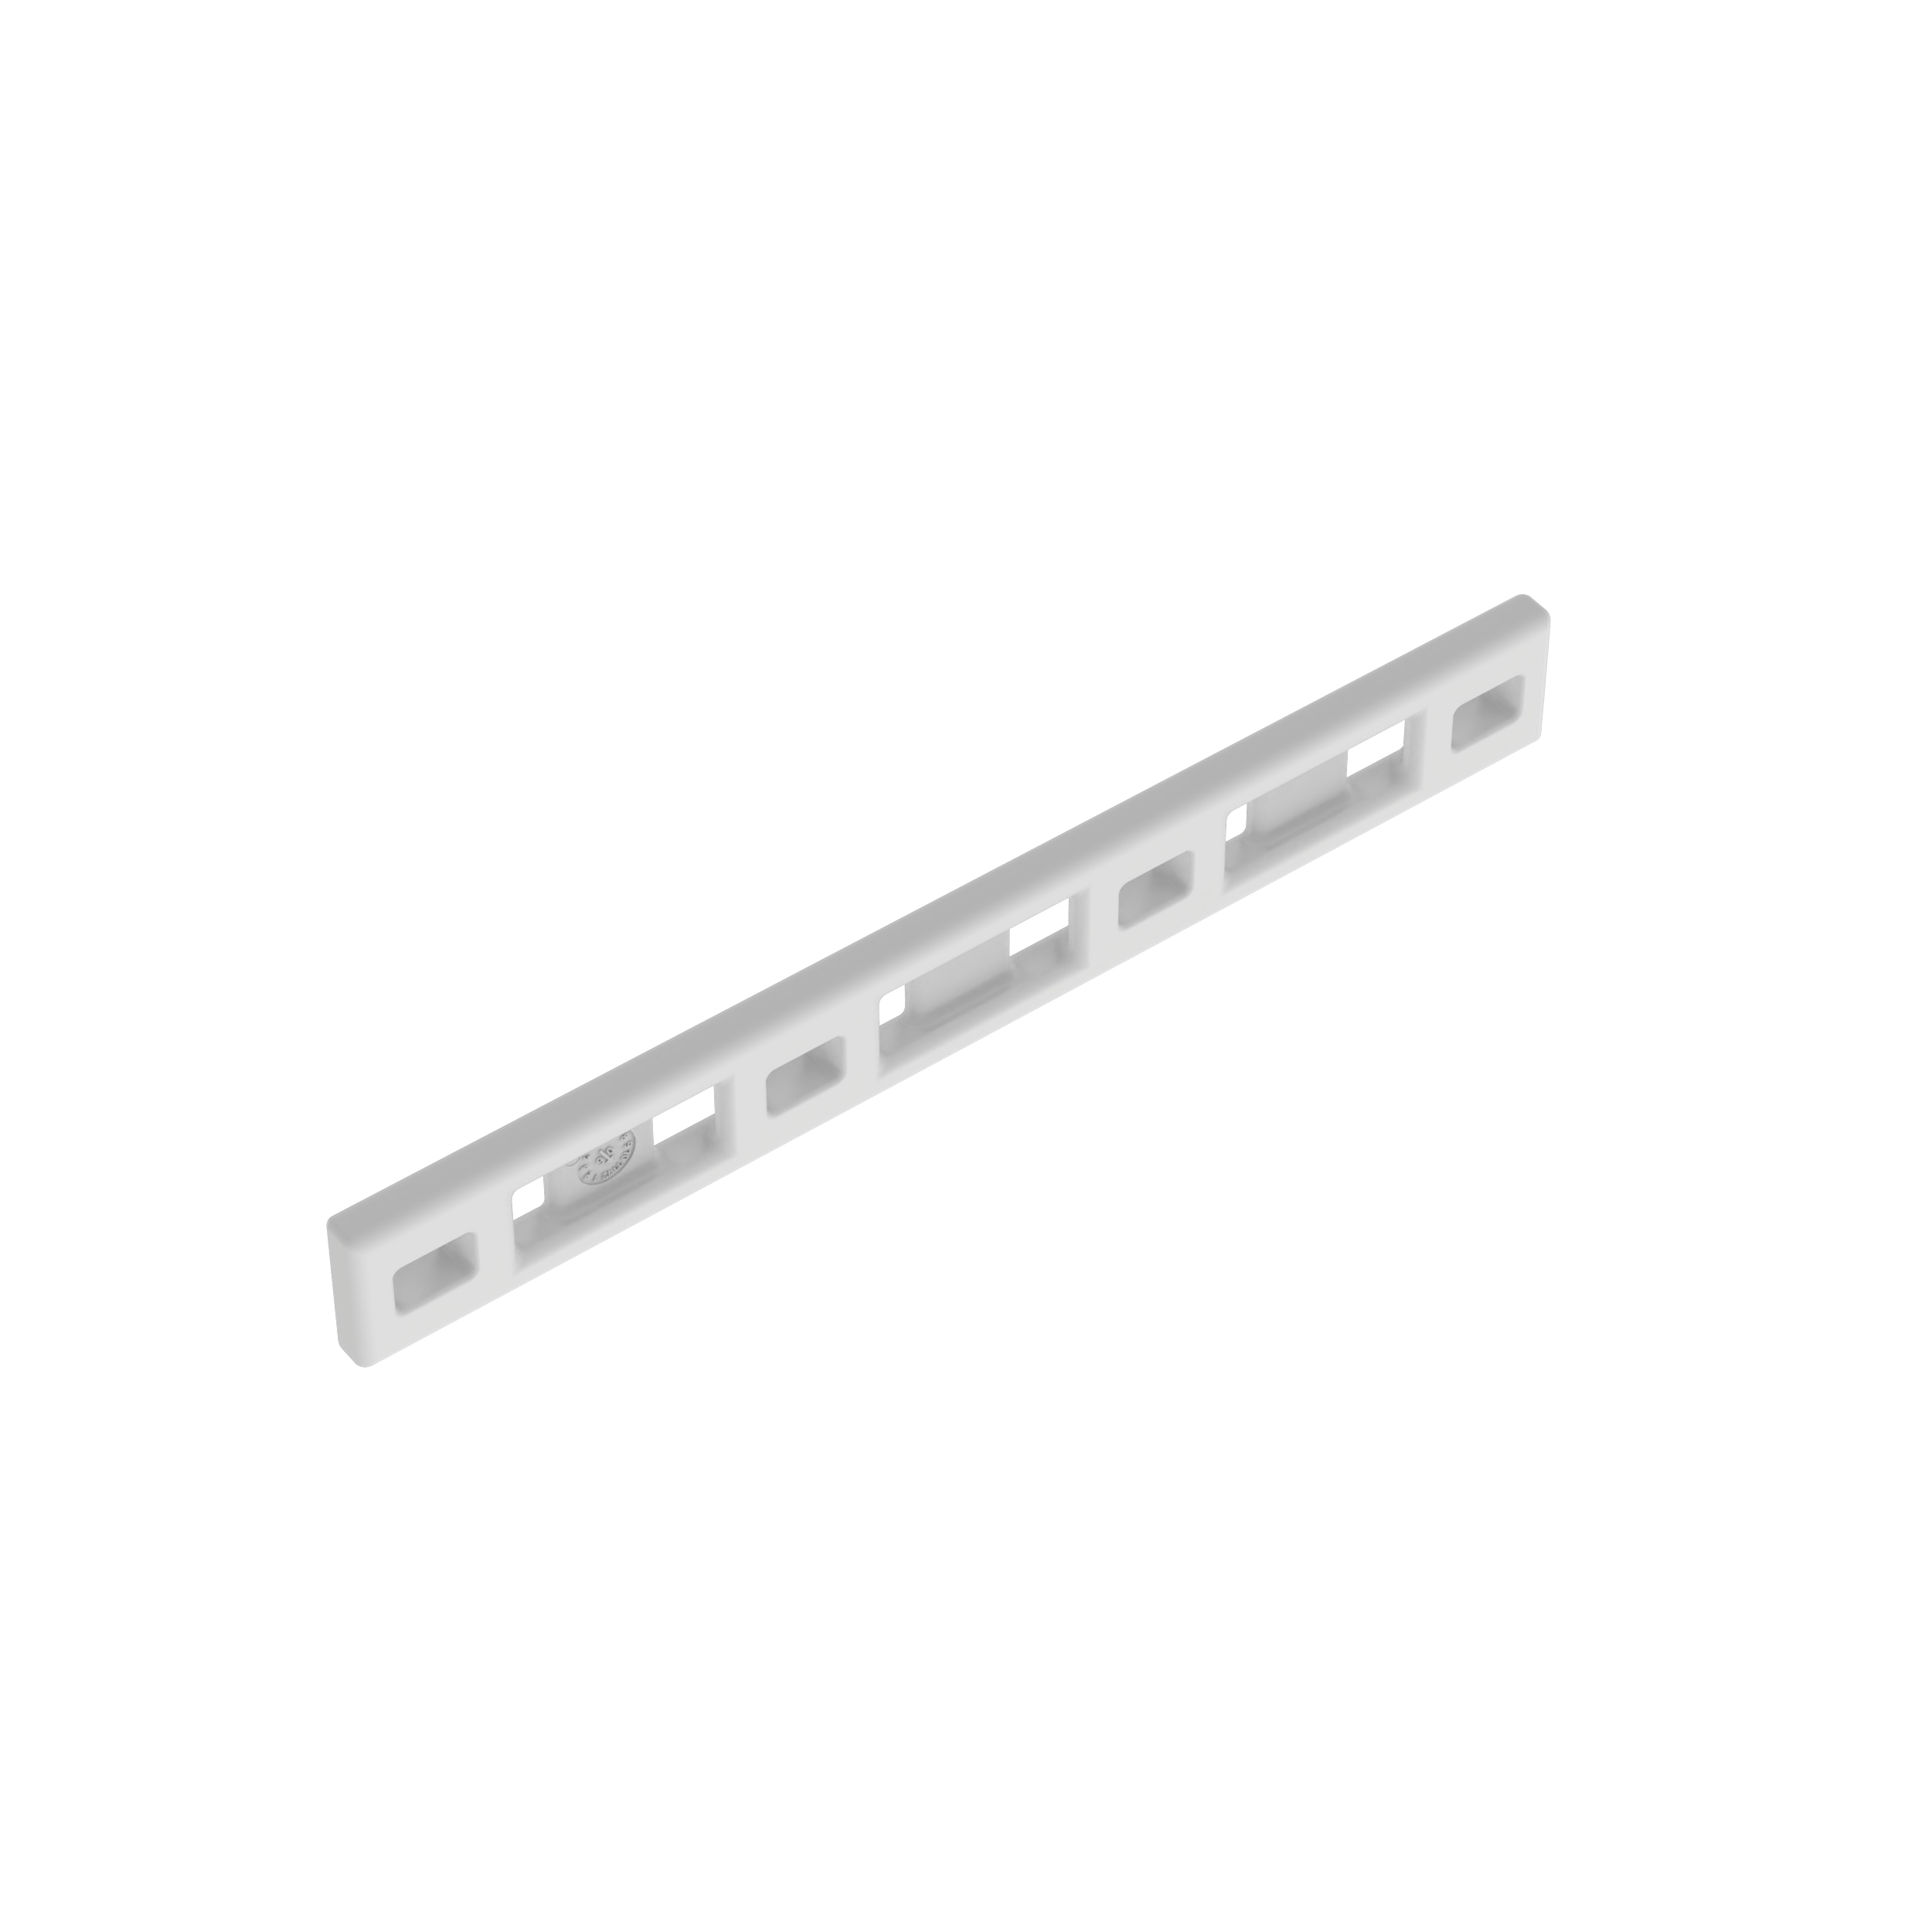 MTPC3H-E10-C39 Cable Tie Mount, High Heat PA 6.6, Screw, 5.09x0.62", PK100